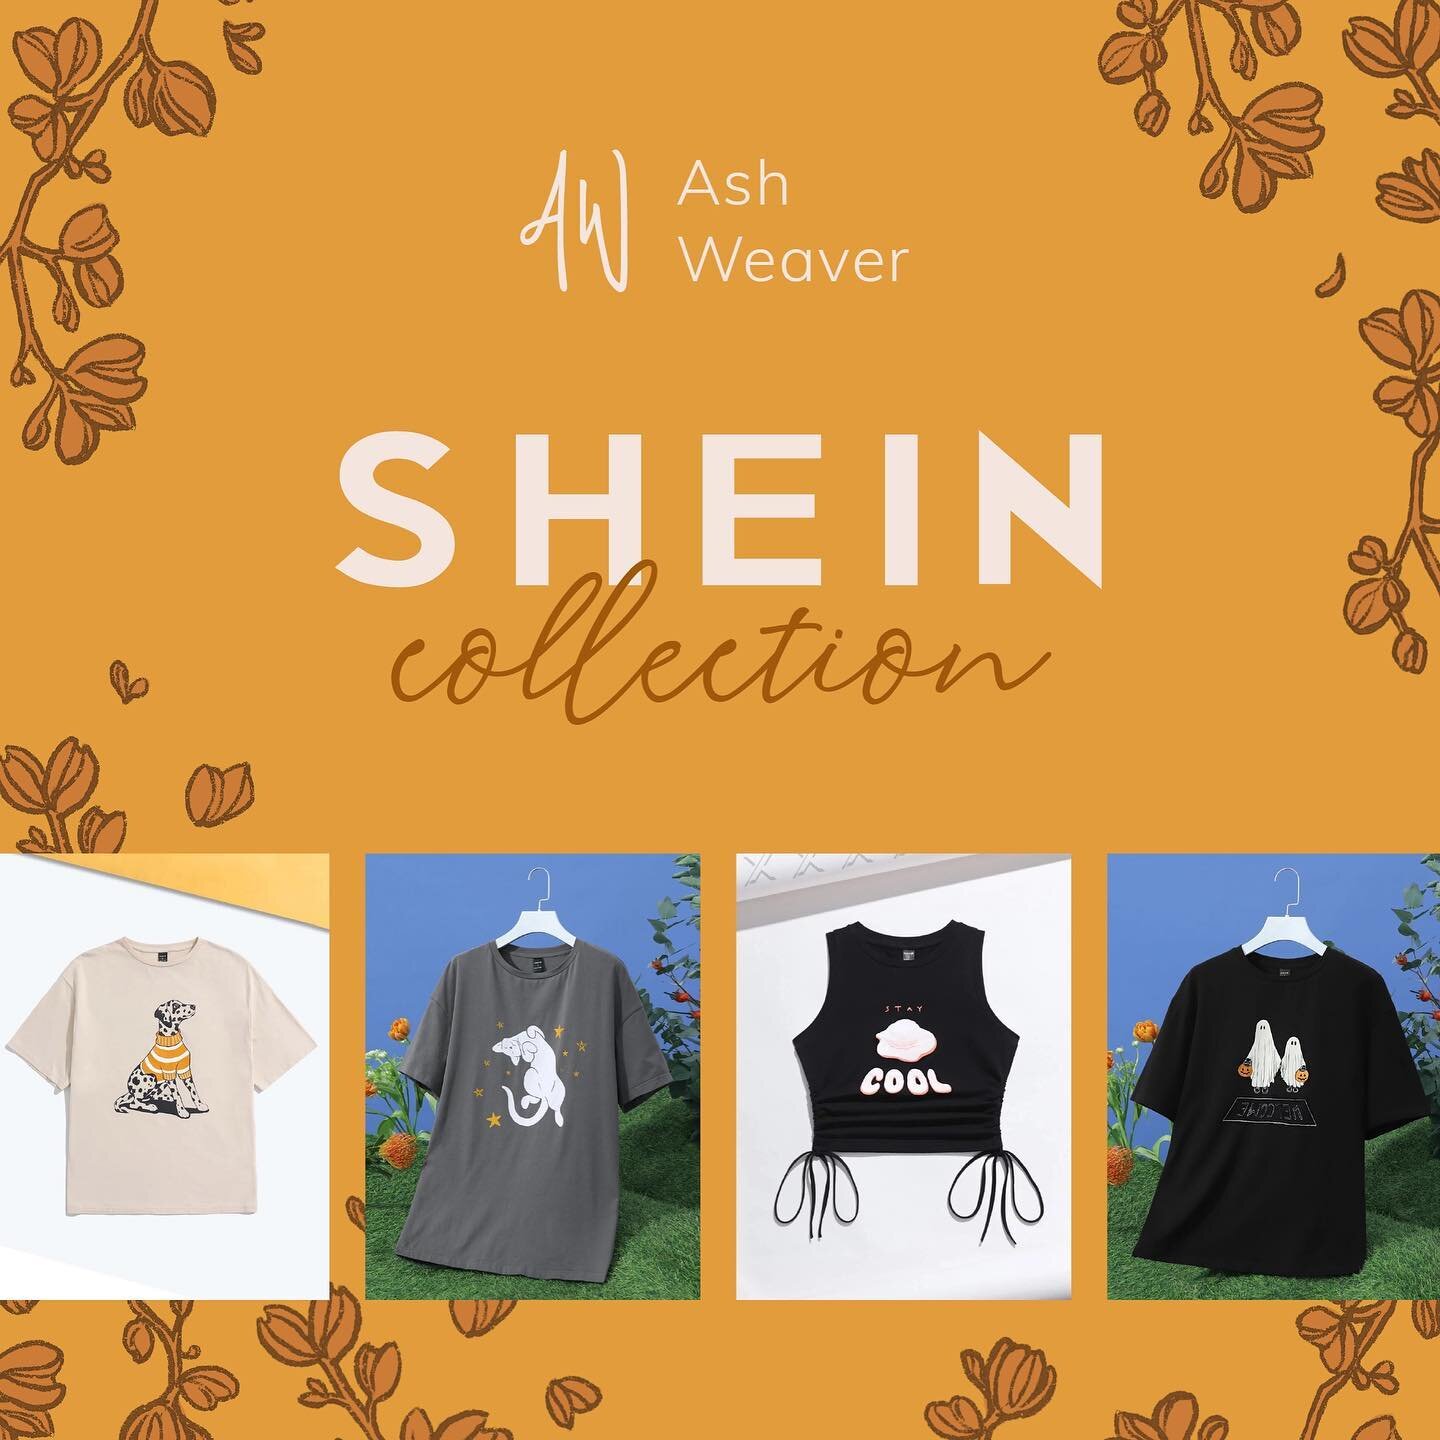 I&rsquo;m so excited to announce that I&rsquo;ve officially launched a new collection of t-shirts with SHEIN! This has been in the works for awhile and it&rsquo;s been killing me to keep it on the DL for so long 😆. The first four shirts have been la